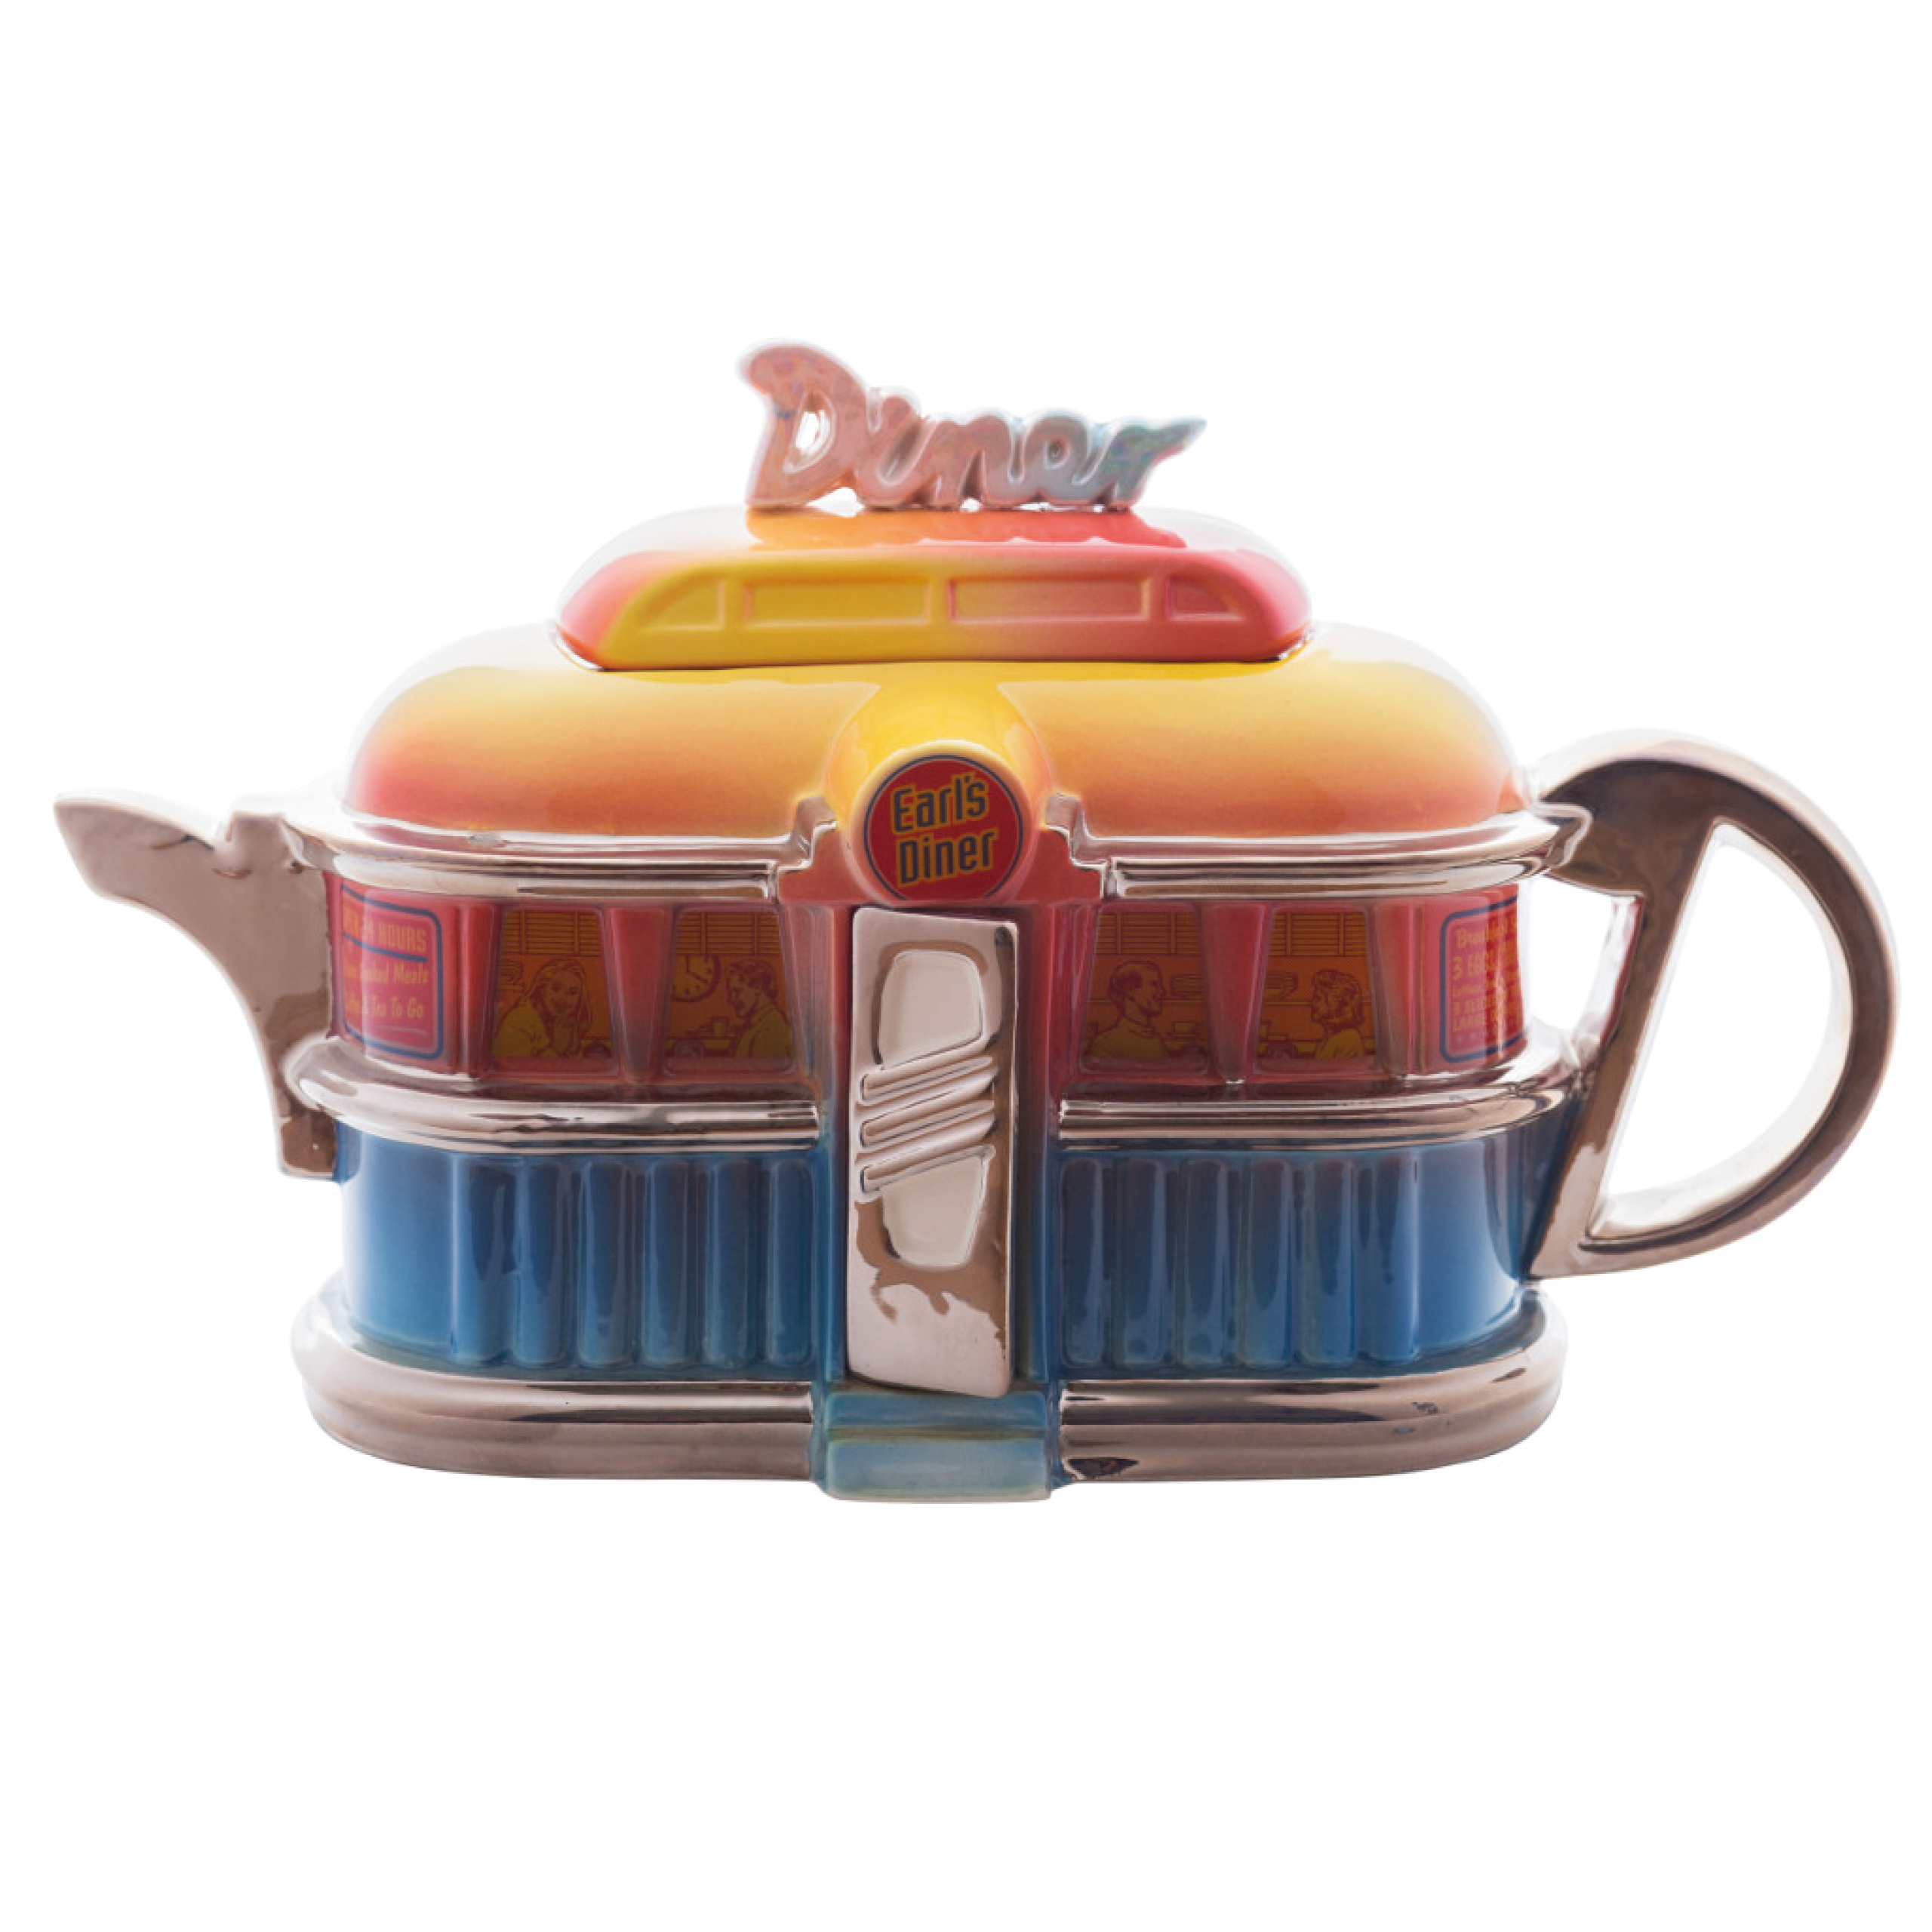 The Teapottery – DINER